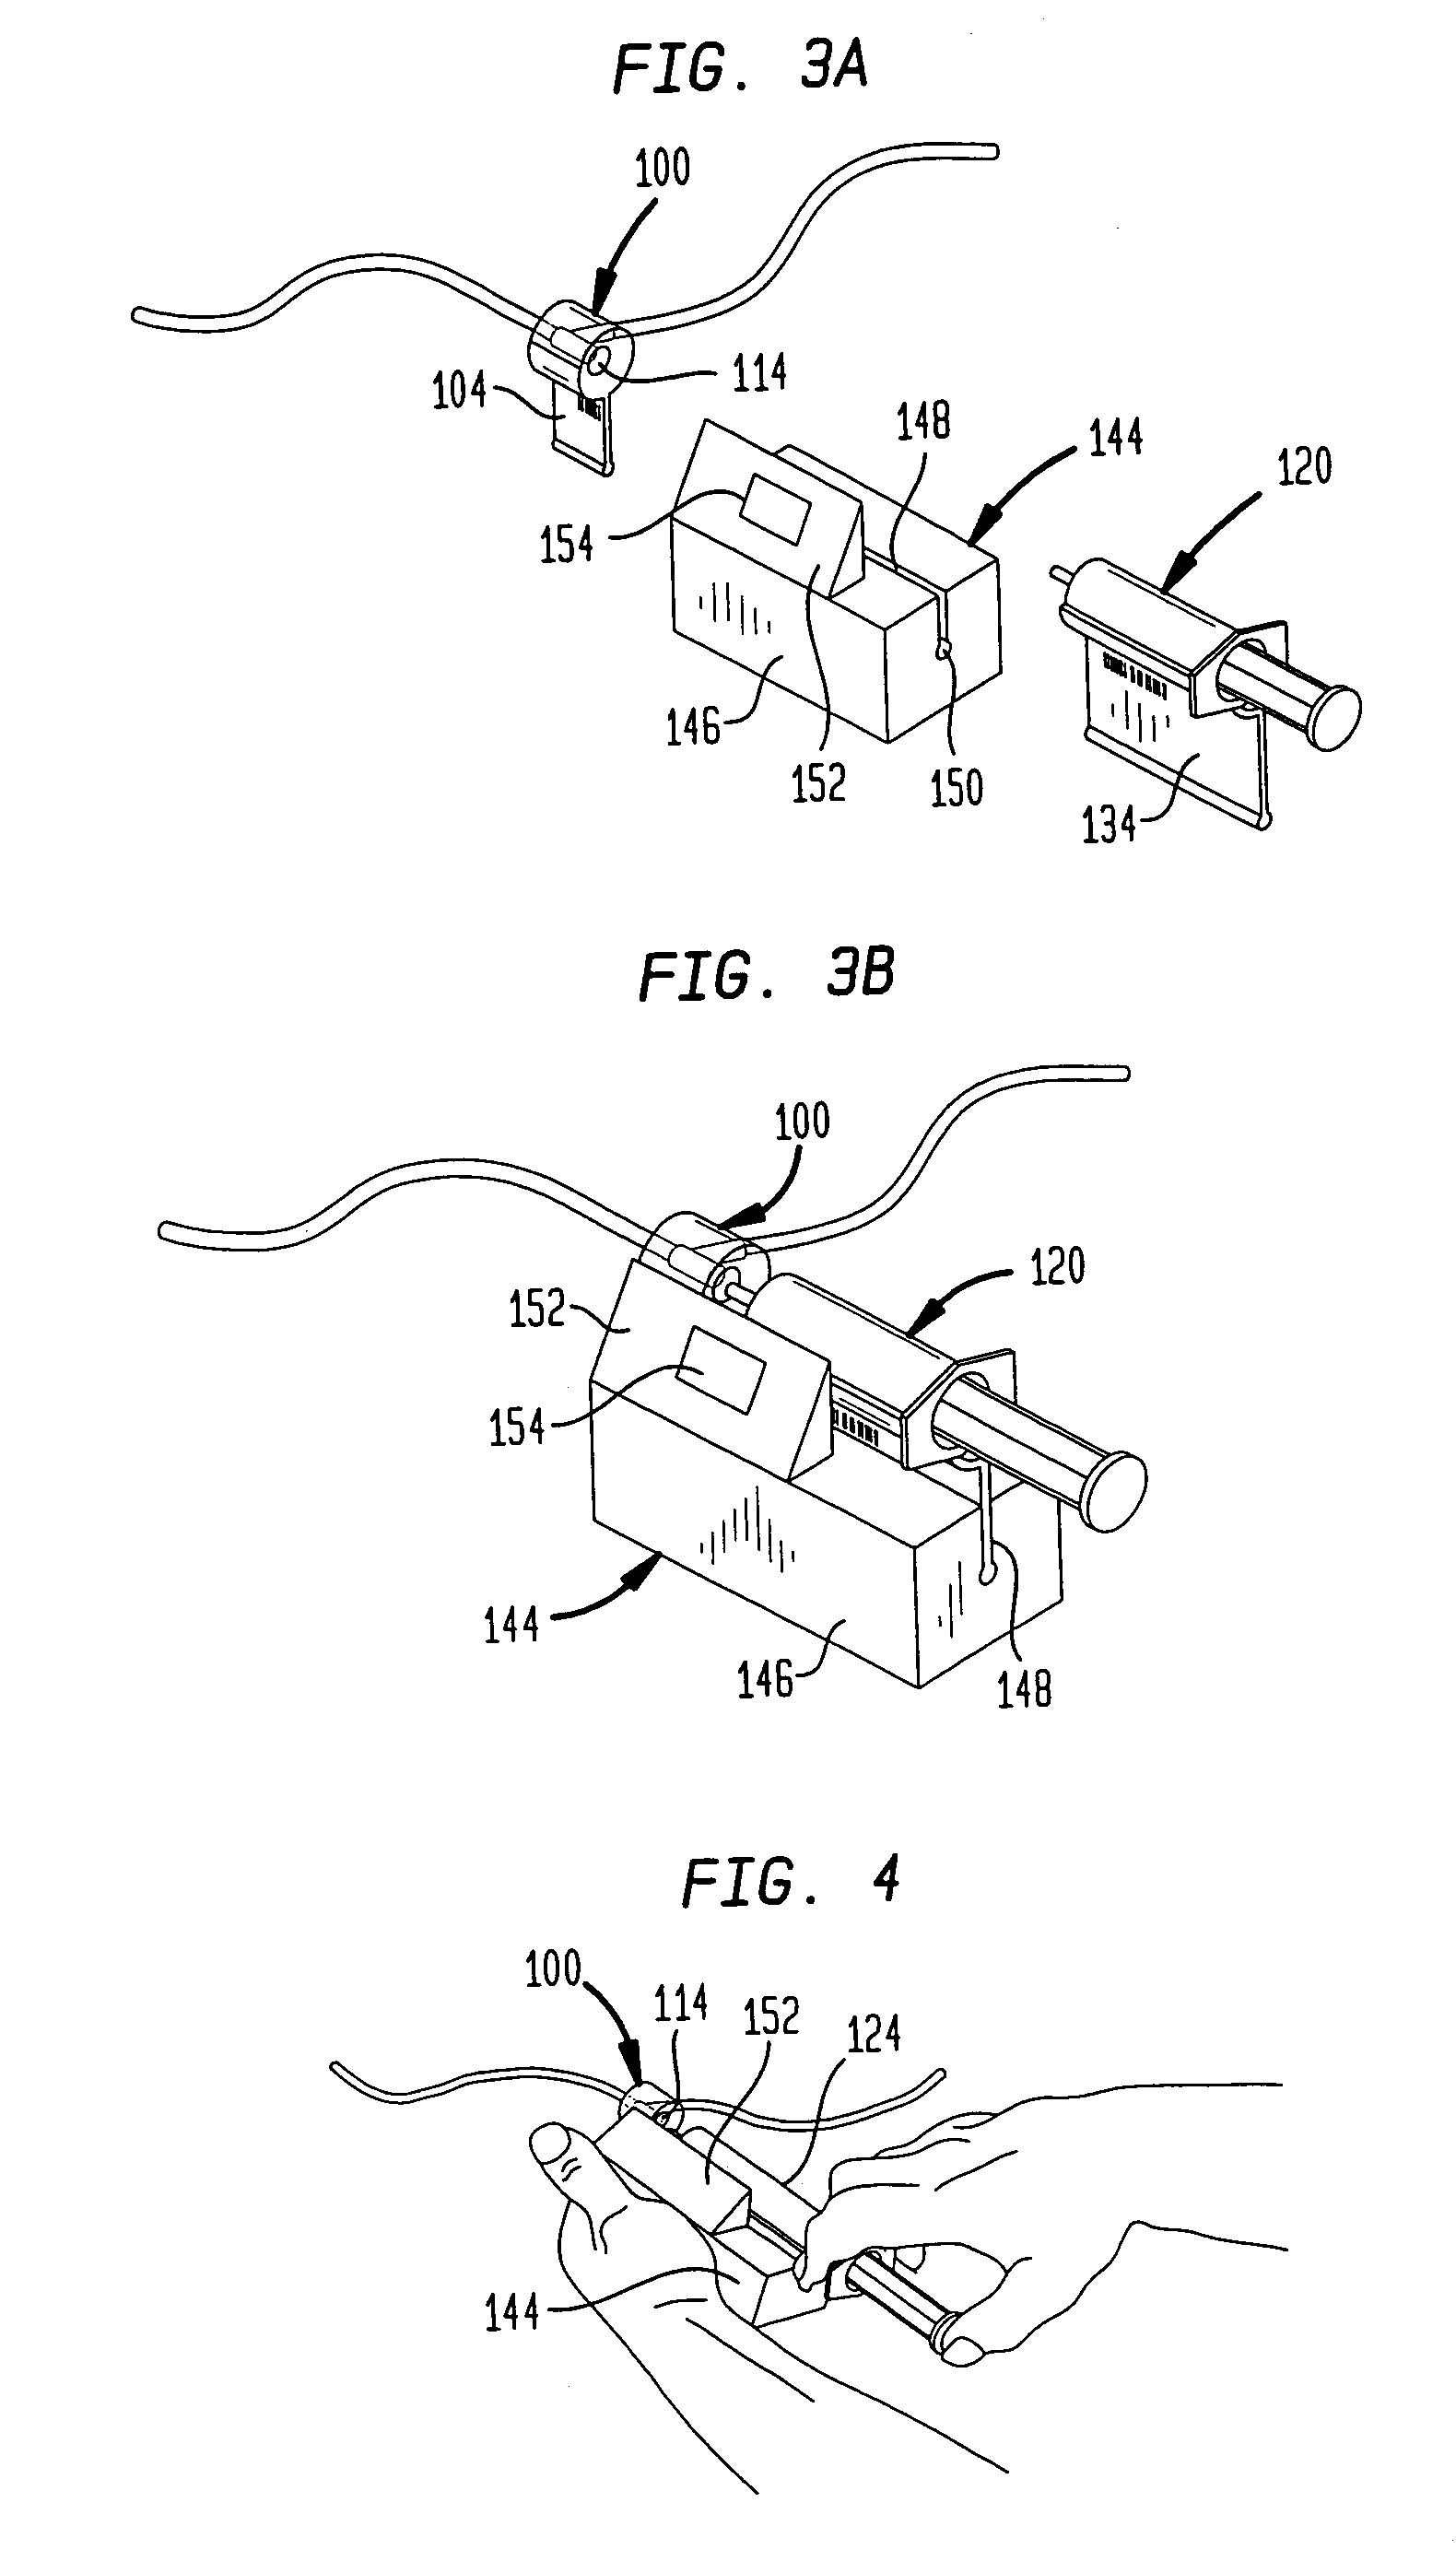 Drug delivery and monitoring system